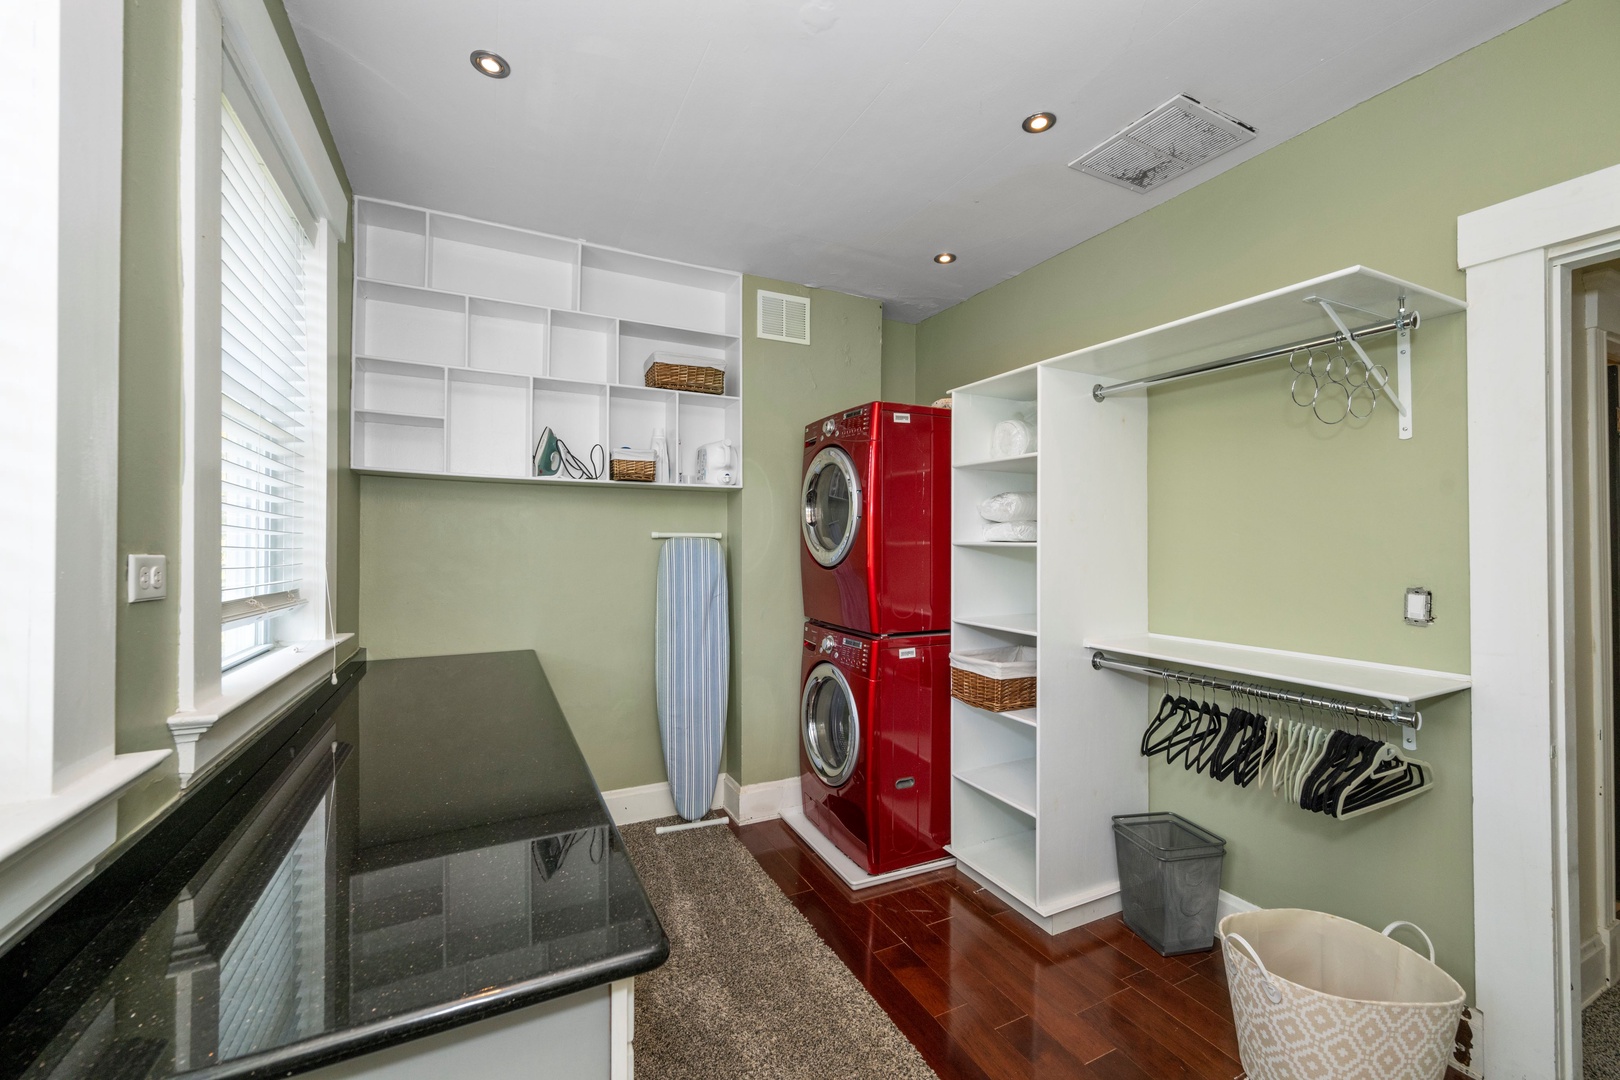 Private laundry is available for your stay, tucked away on the second floor